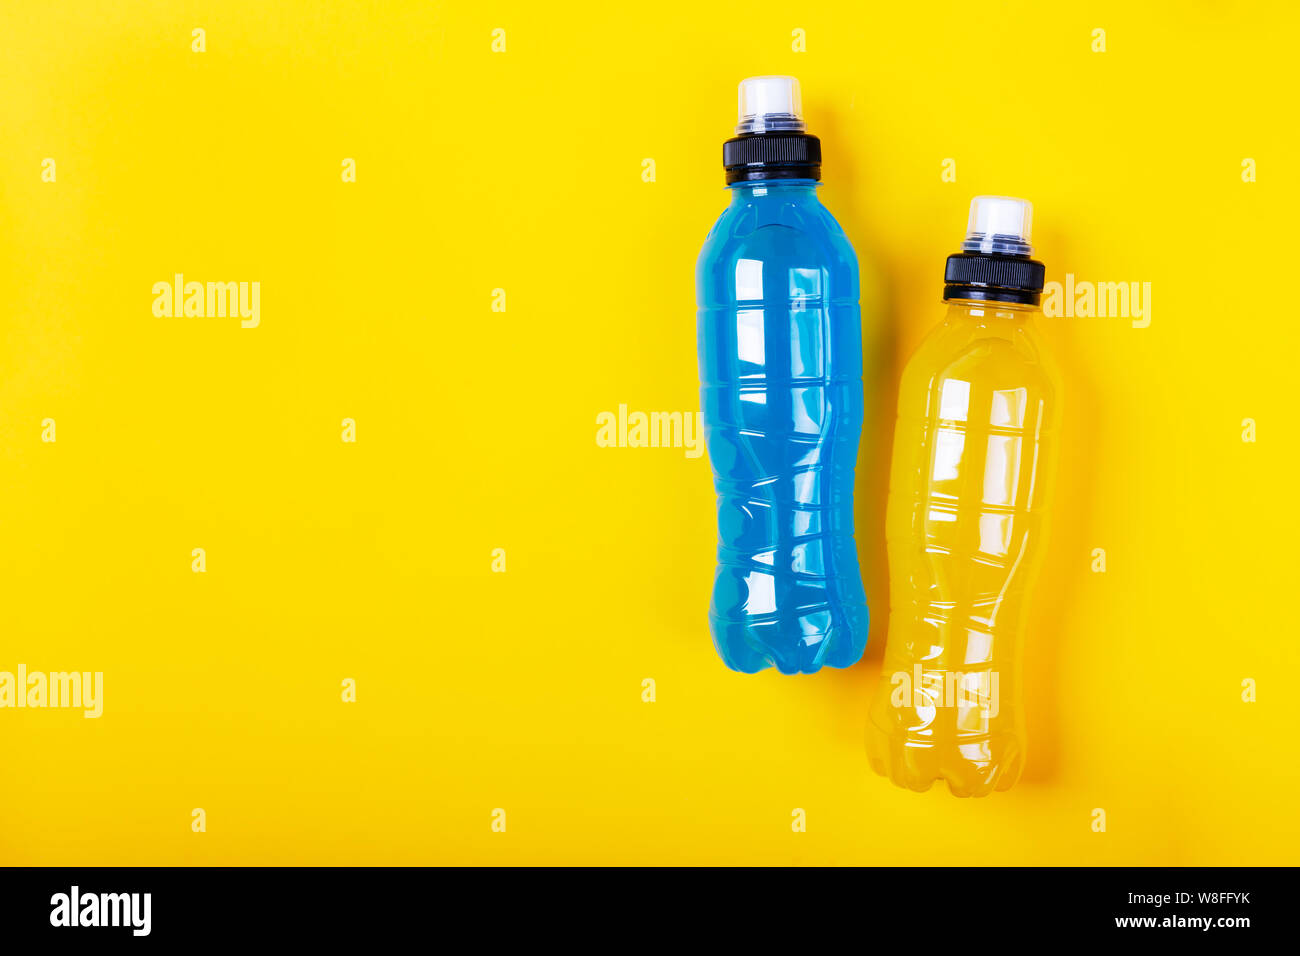 Isotonic Energy Drink Bottle With Blue And Yellow Transparent Liquid Sport Beverage On A Colorful Background It Usually Contains Salt And Sugar And Stock Photo Alamy